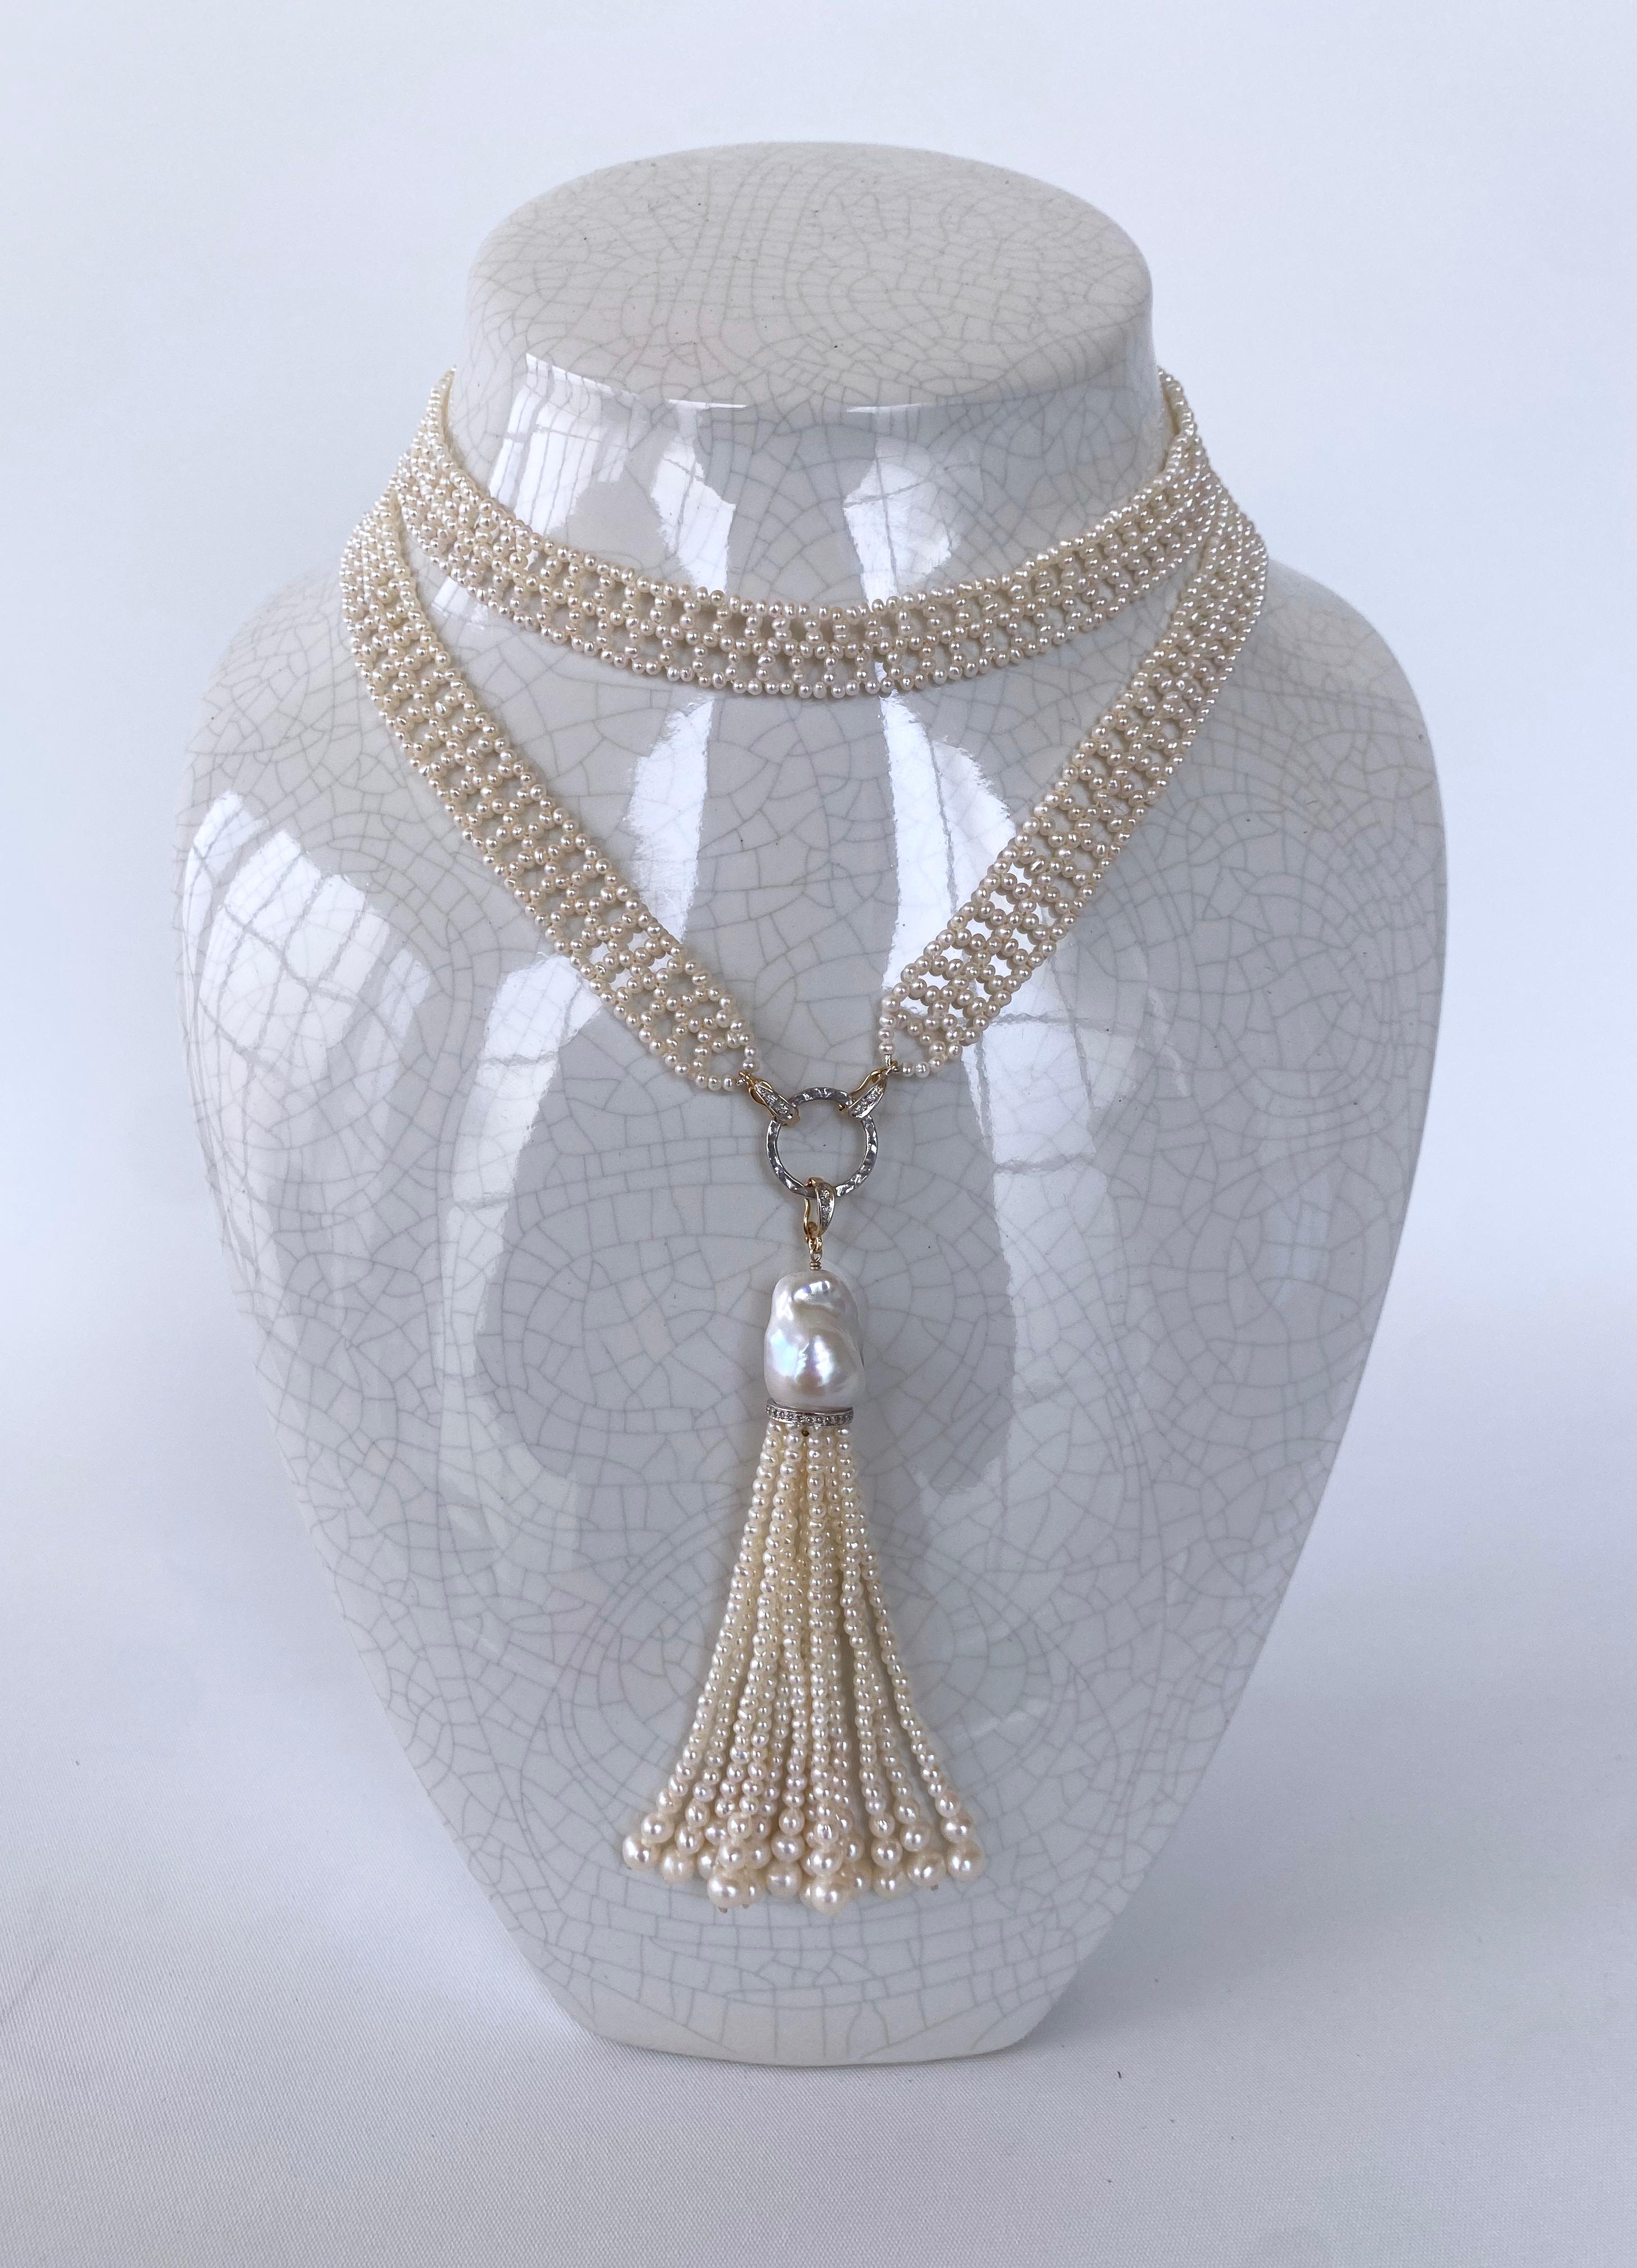 Marina J. Woven Pearl Lace Sautoir with Diamond Encrusted Solid 14k Gold For Sale 2